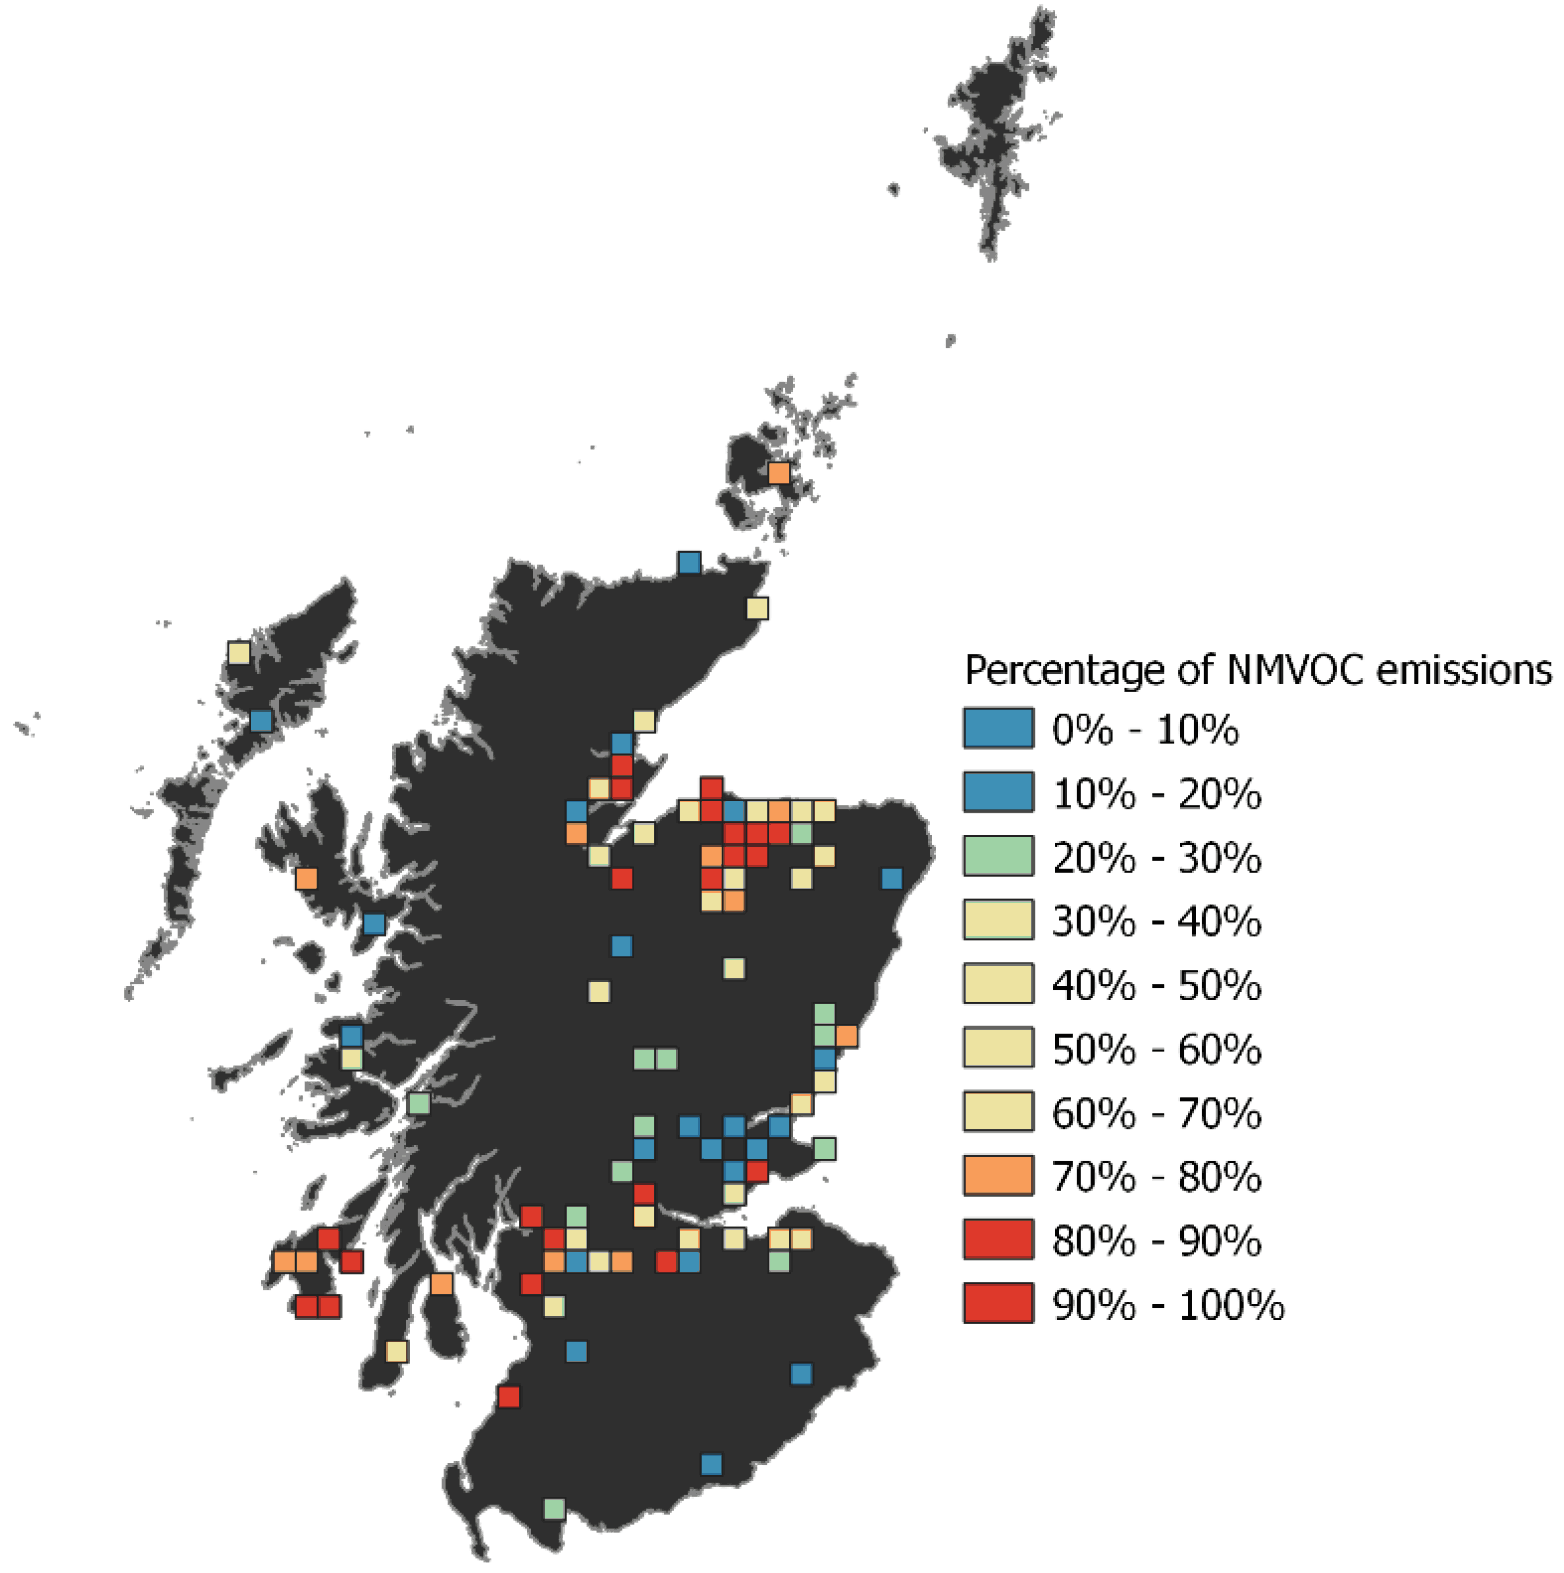 Scotland divided into 10km x 10km grid squares showing percentagel NMVOC emissions in each grid square that can be attributed to Scotch whisky production.